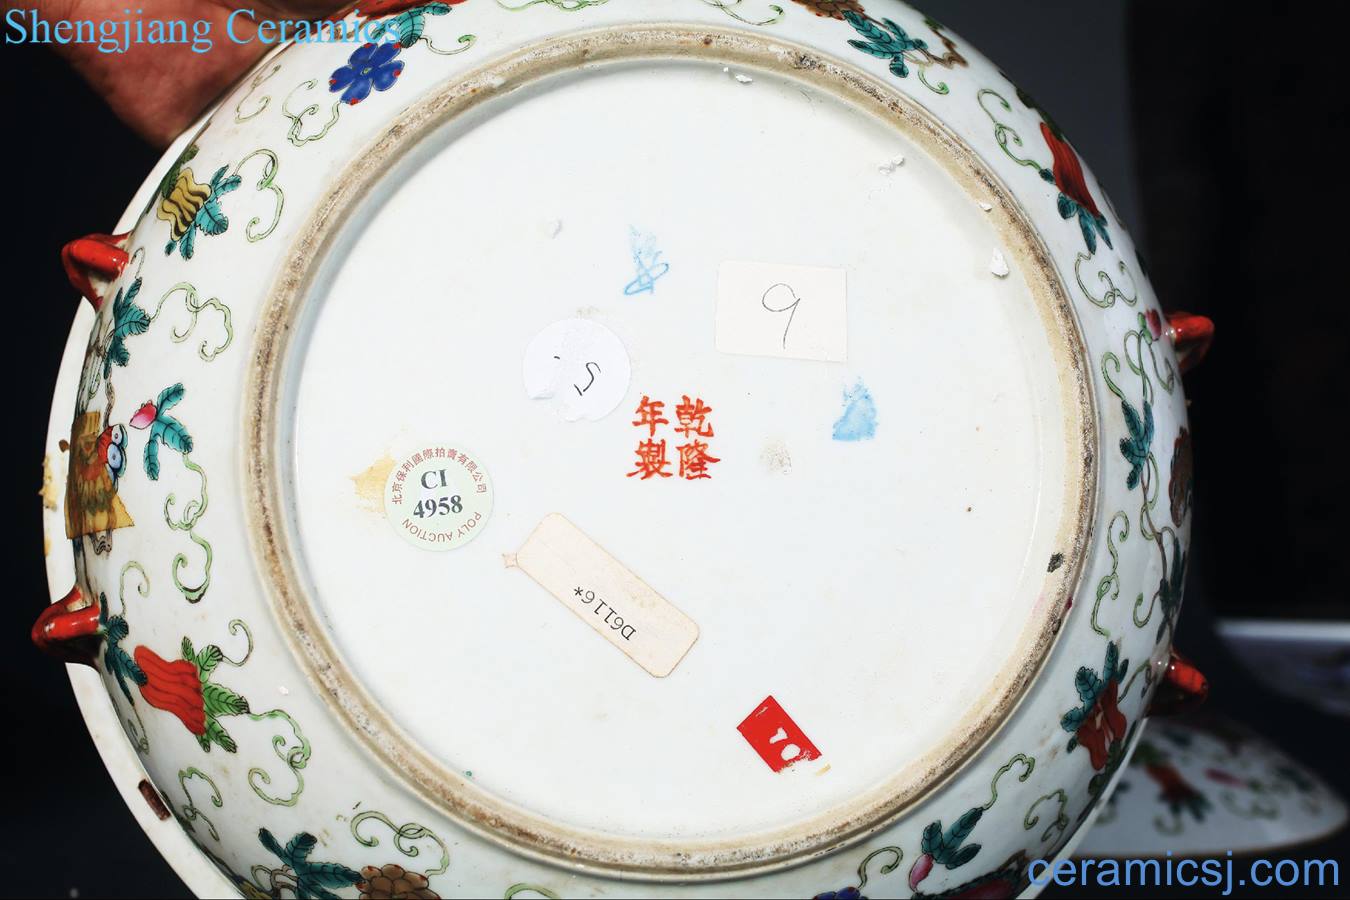 Pastel reign of qing emperor guangxu butterfly cover basin